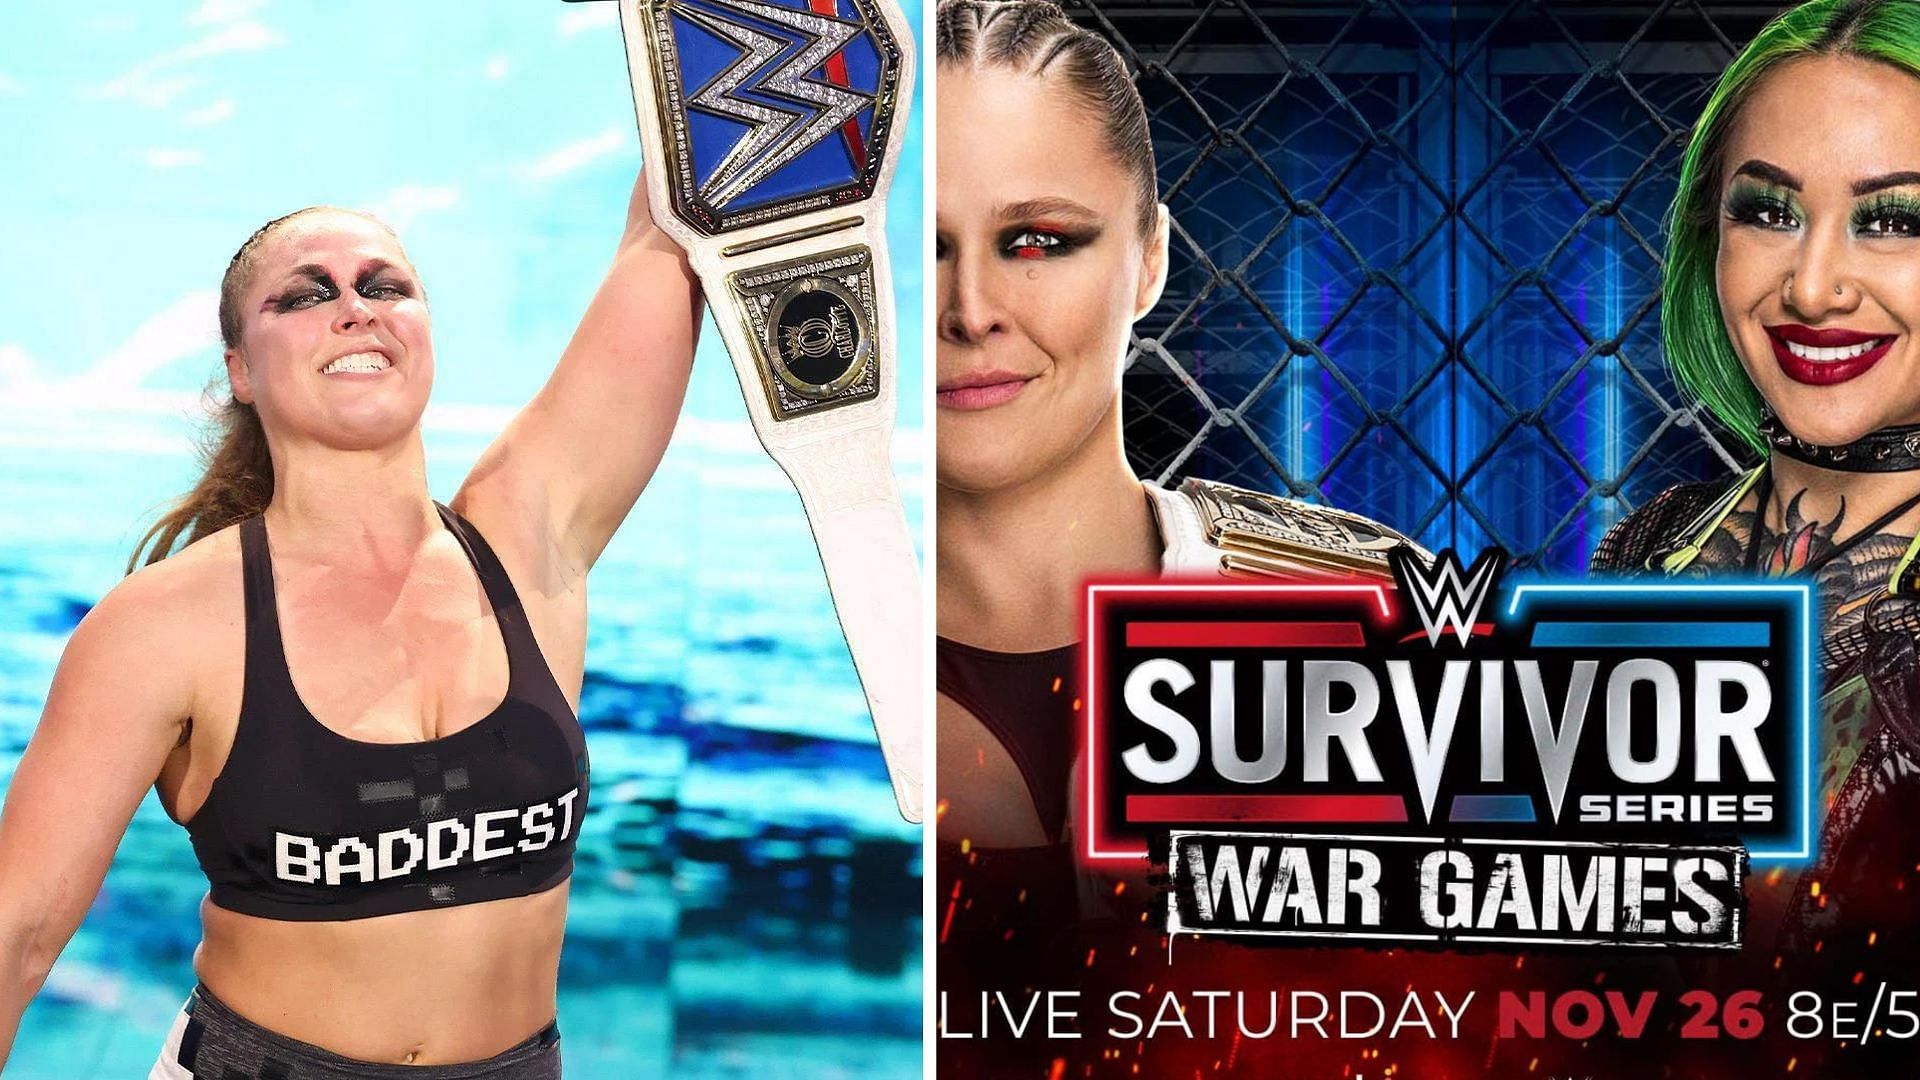 Ronda Rousey is the heavy favorite this Saturday at WWE Survivor Series